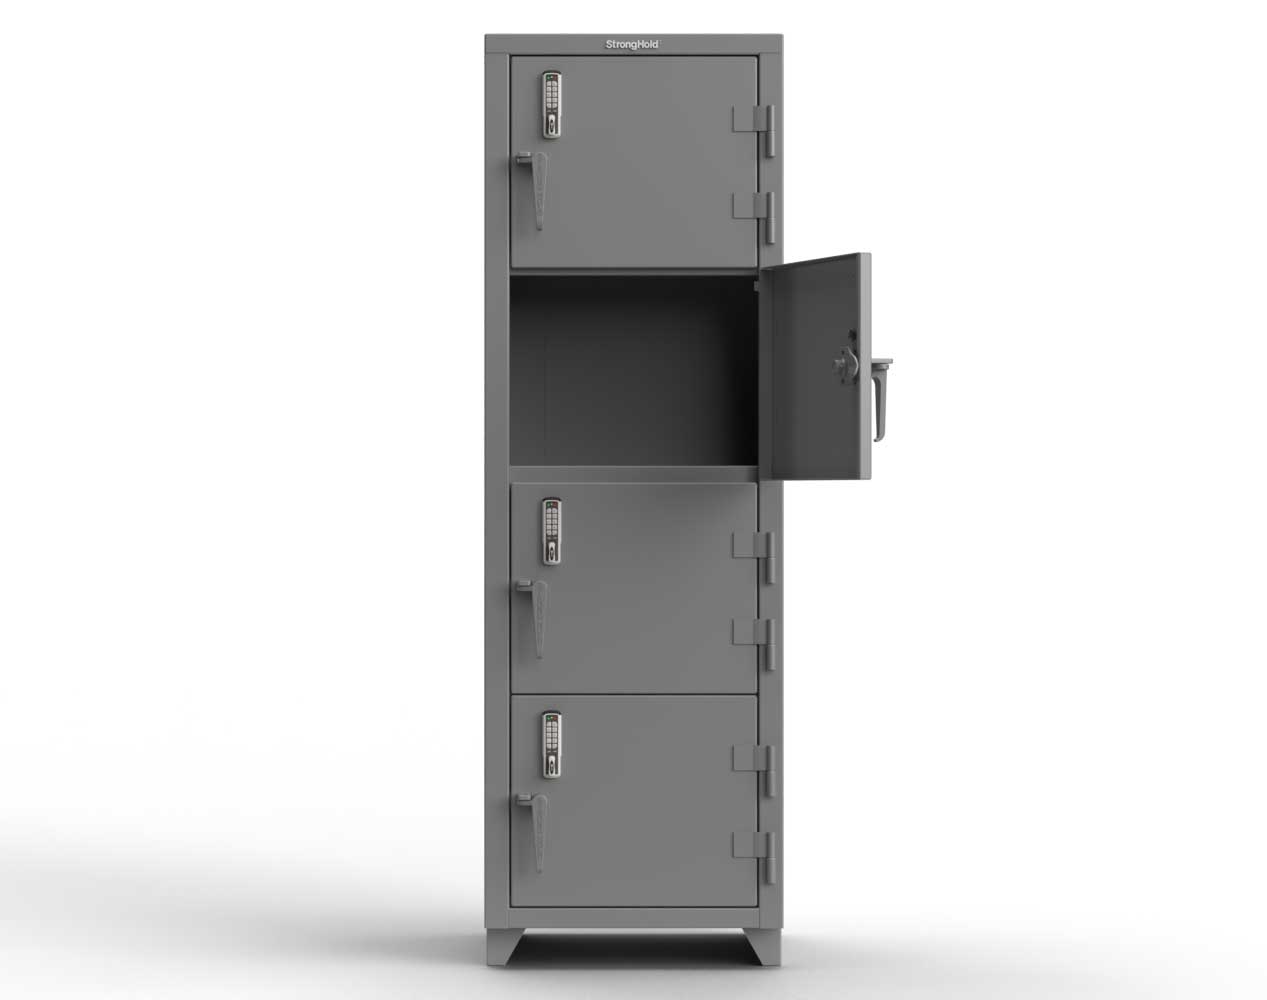 Extra Heavy Duty 14 GA 4-Tier Locker with Keyless Entry Lock, 4 Compartments - 24 in. W x 24 in. D x 75 in. H